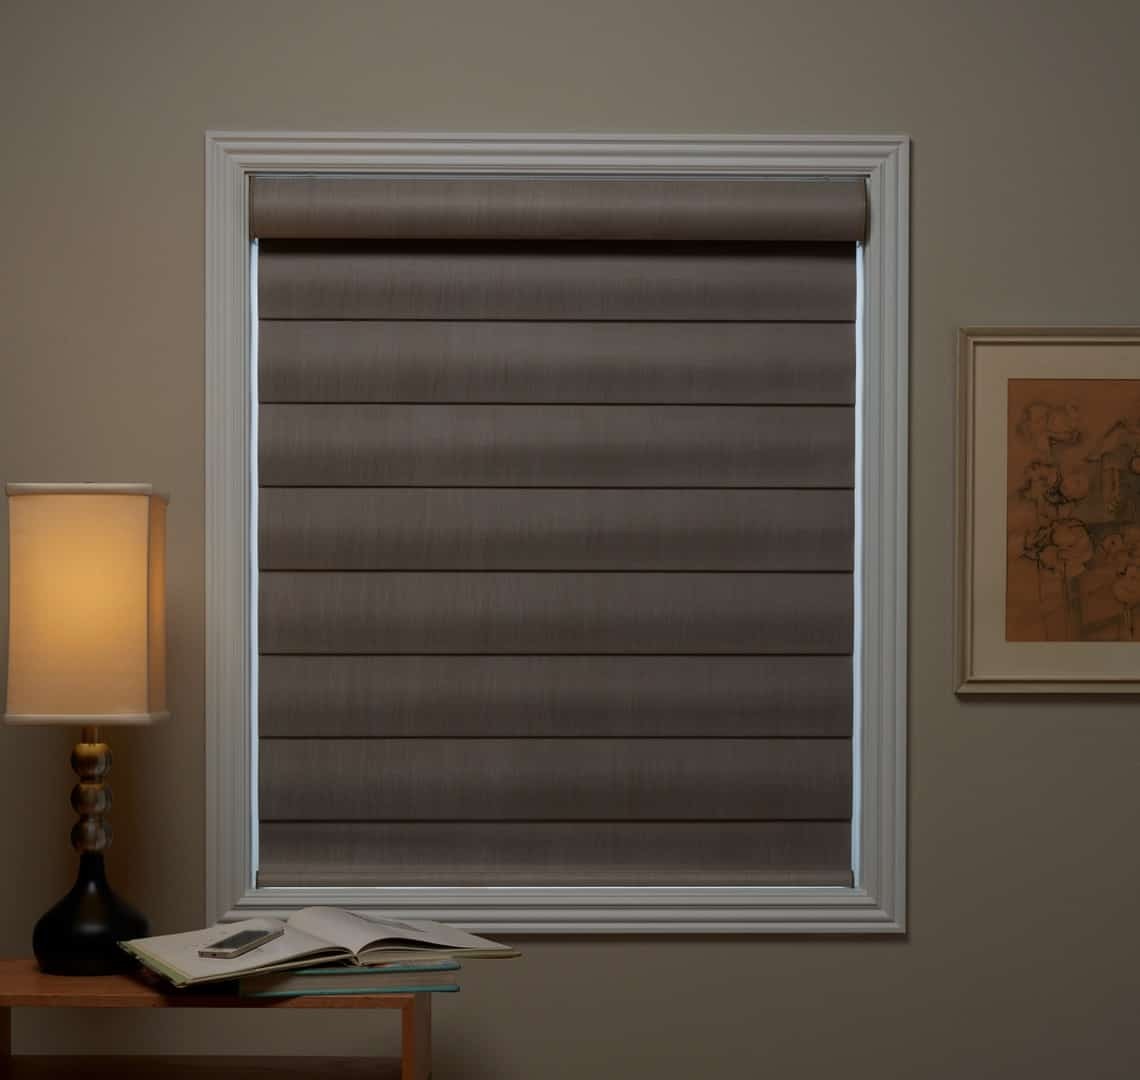 Pirouette® Window Shades Santa Fe, New Mexico (NM) and the latest operating systems and materials.